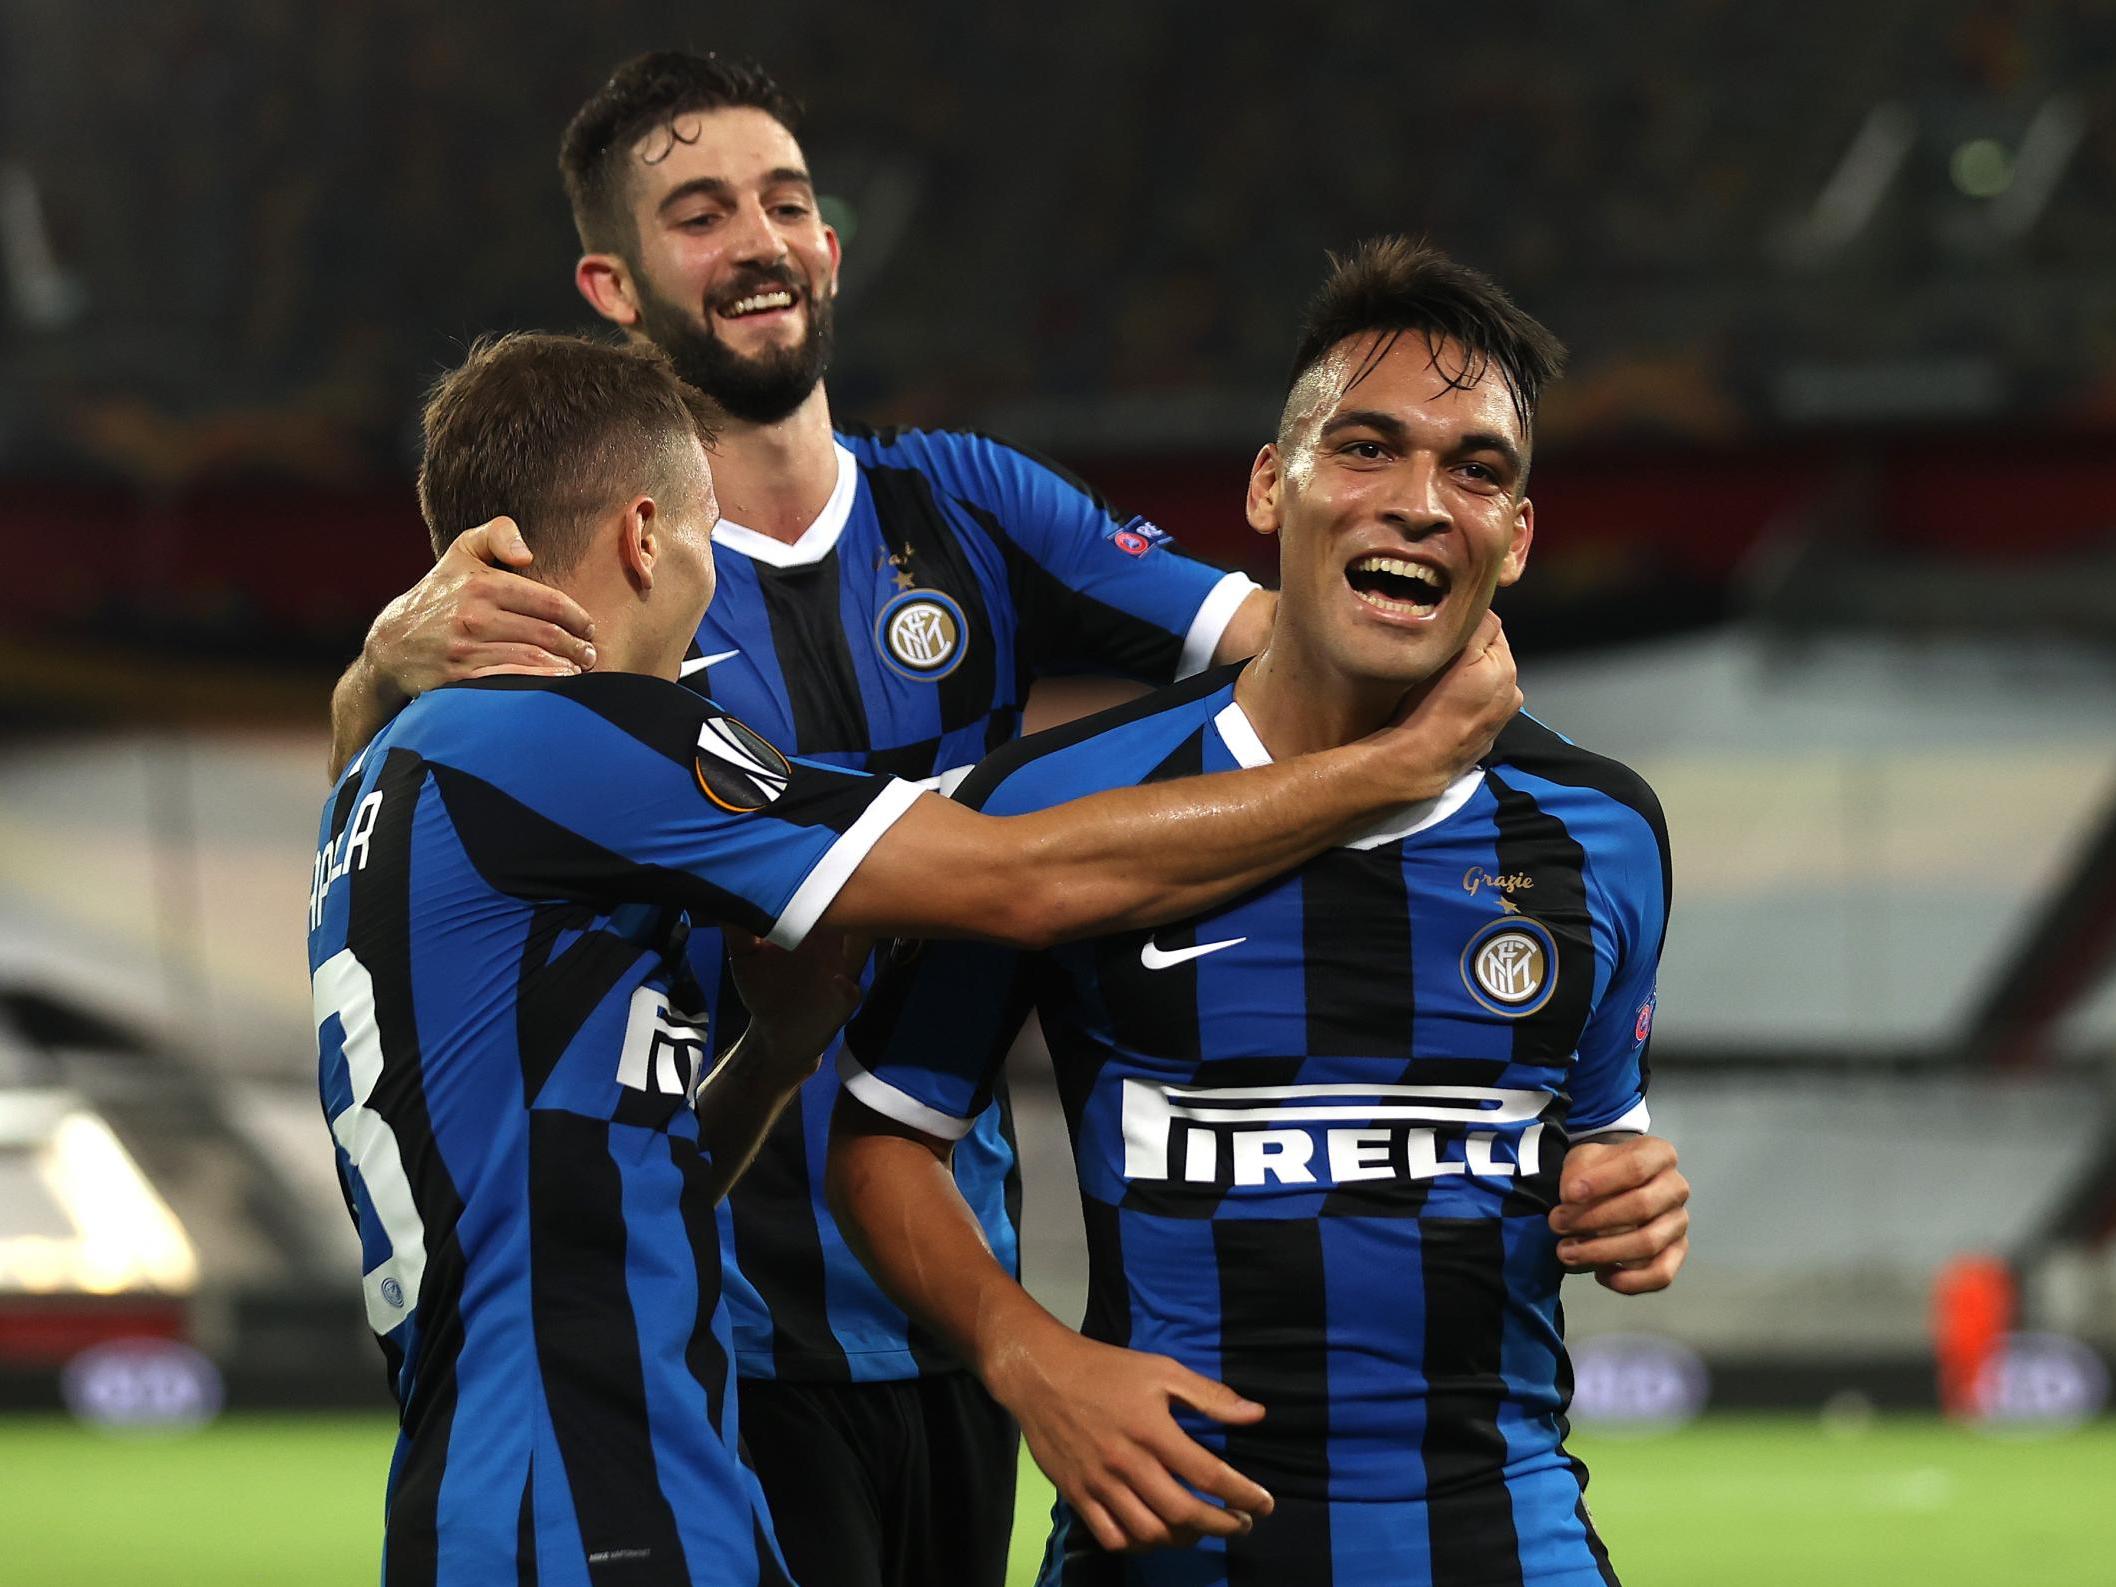 Internazionale's trophy drought has lasted nine years